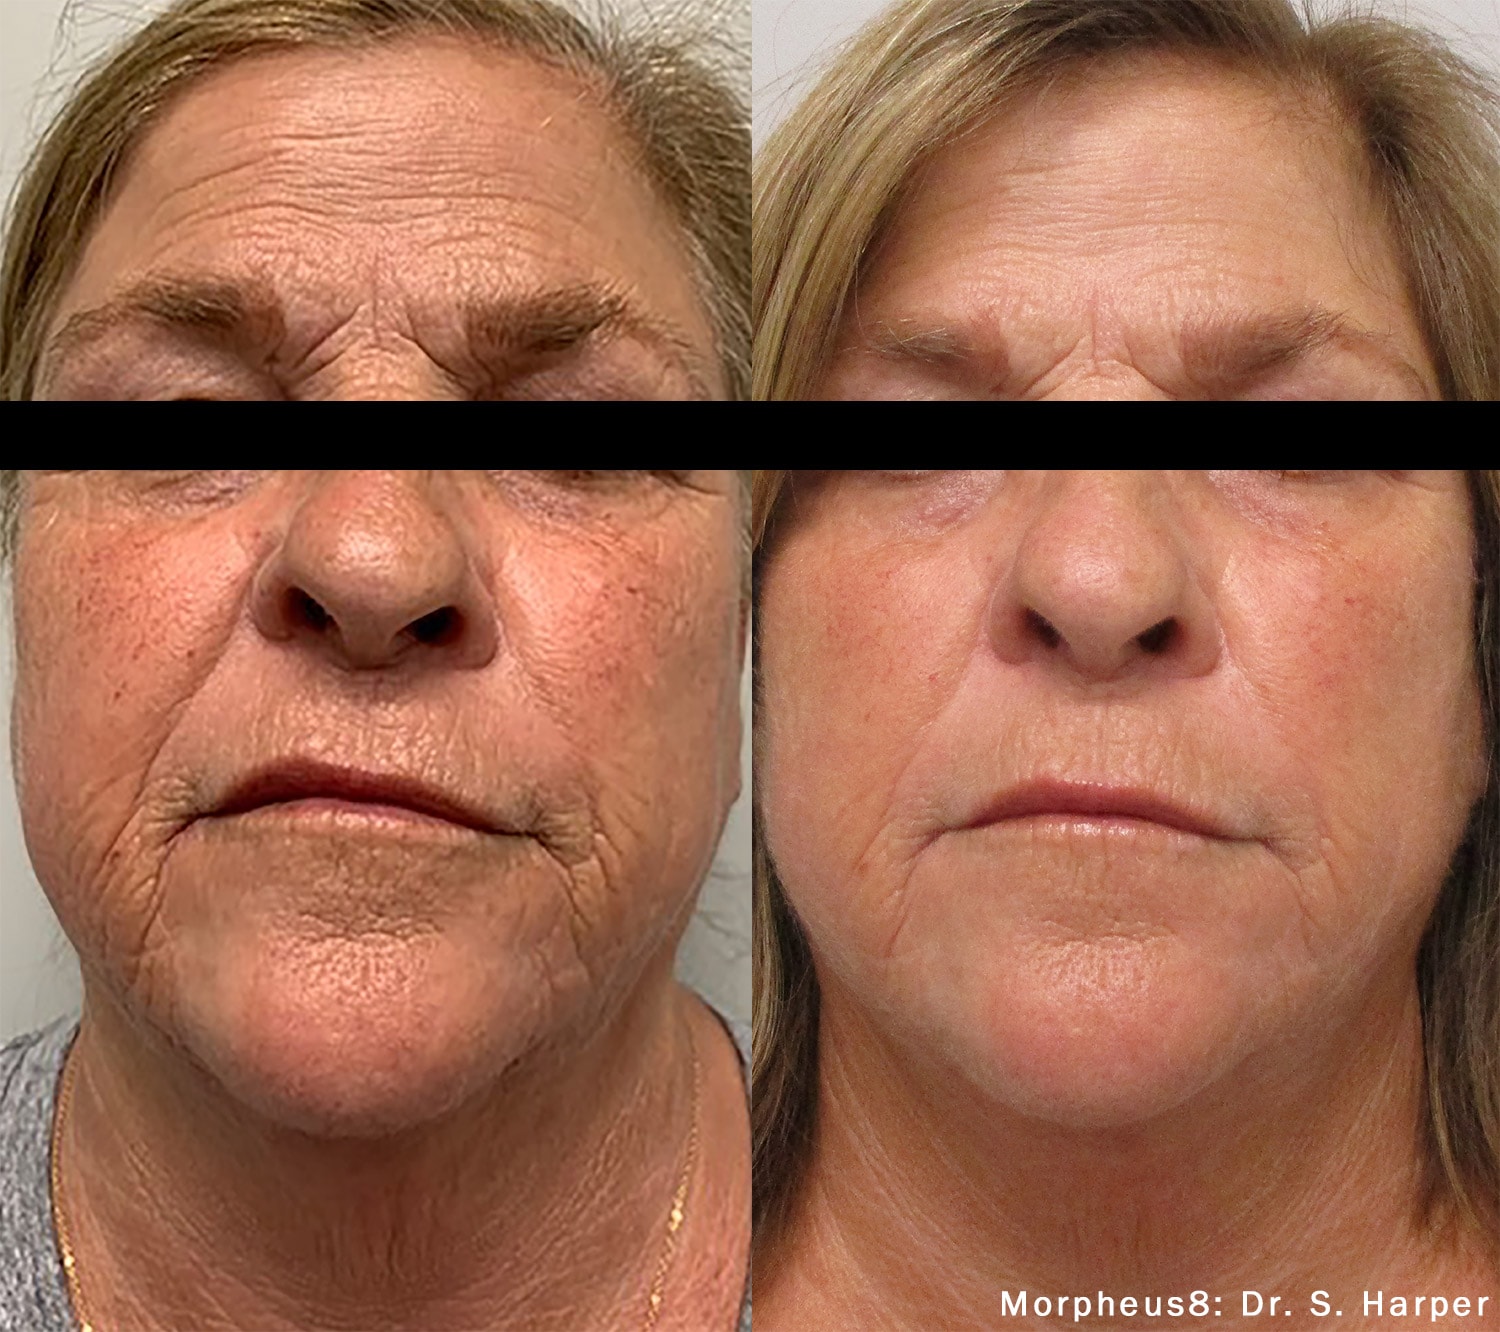 Before and After photos of Morpheus8 treatments reducing deep wrinkles from sun damage on a woman’s face and neck